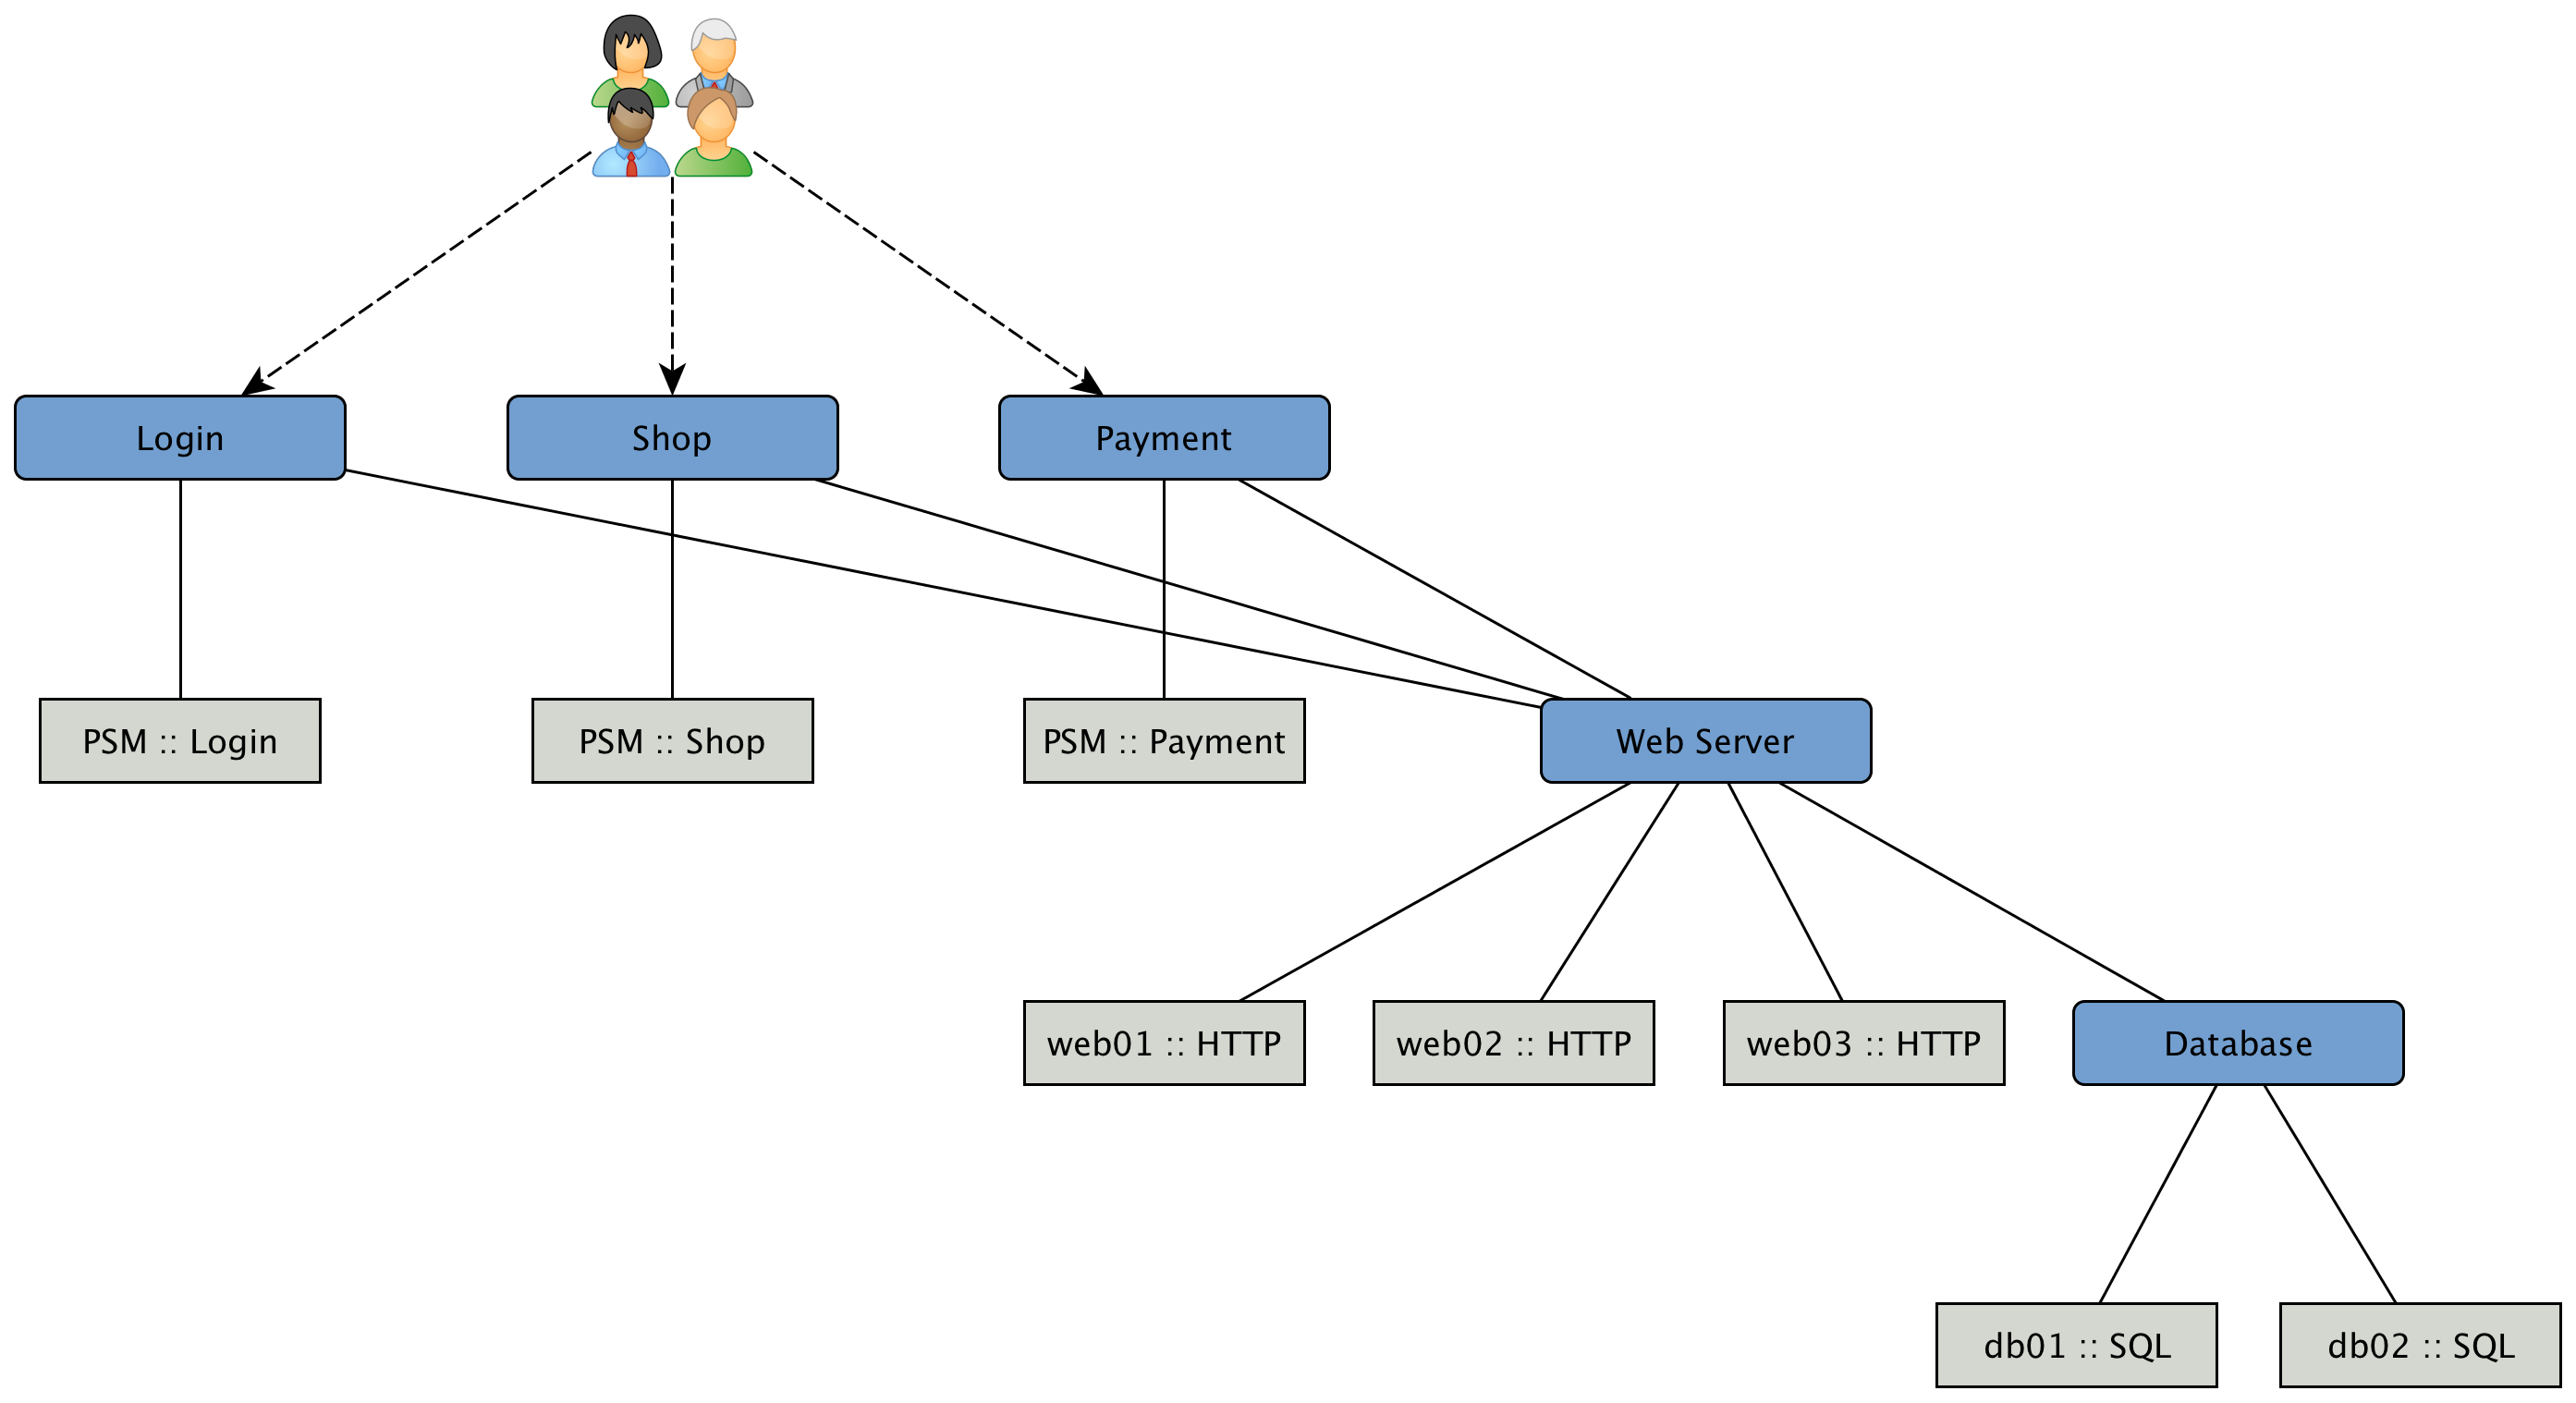 Example system hierarchy diagram showing relationships among users, workflows, and systems